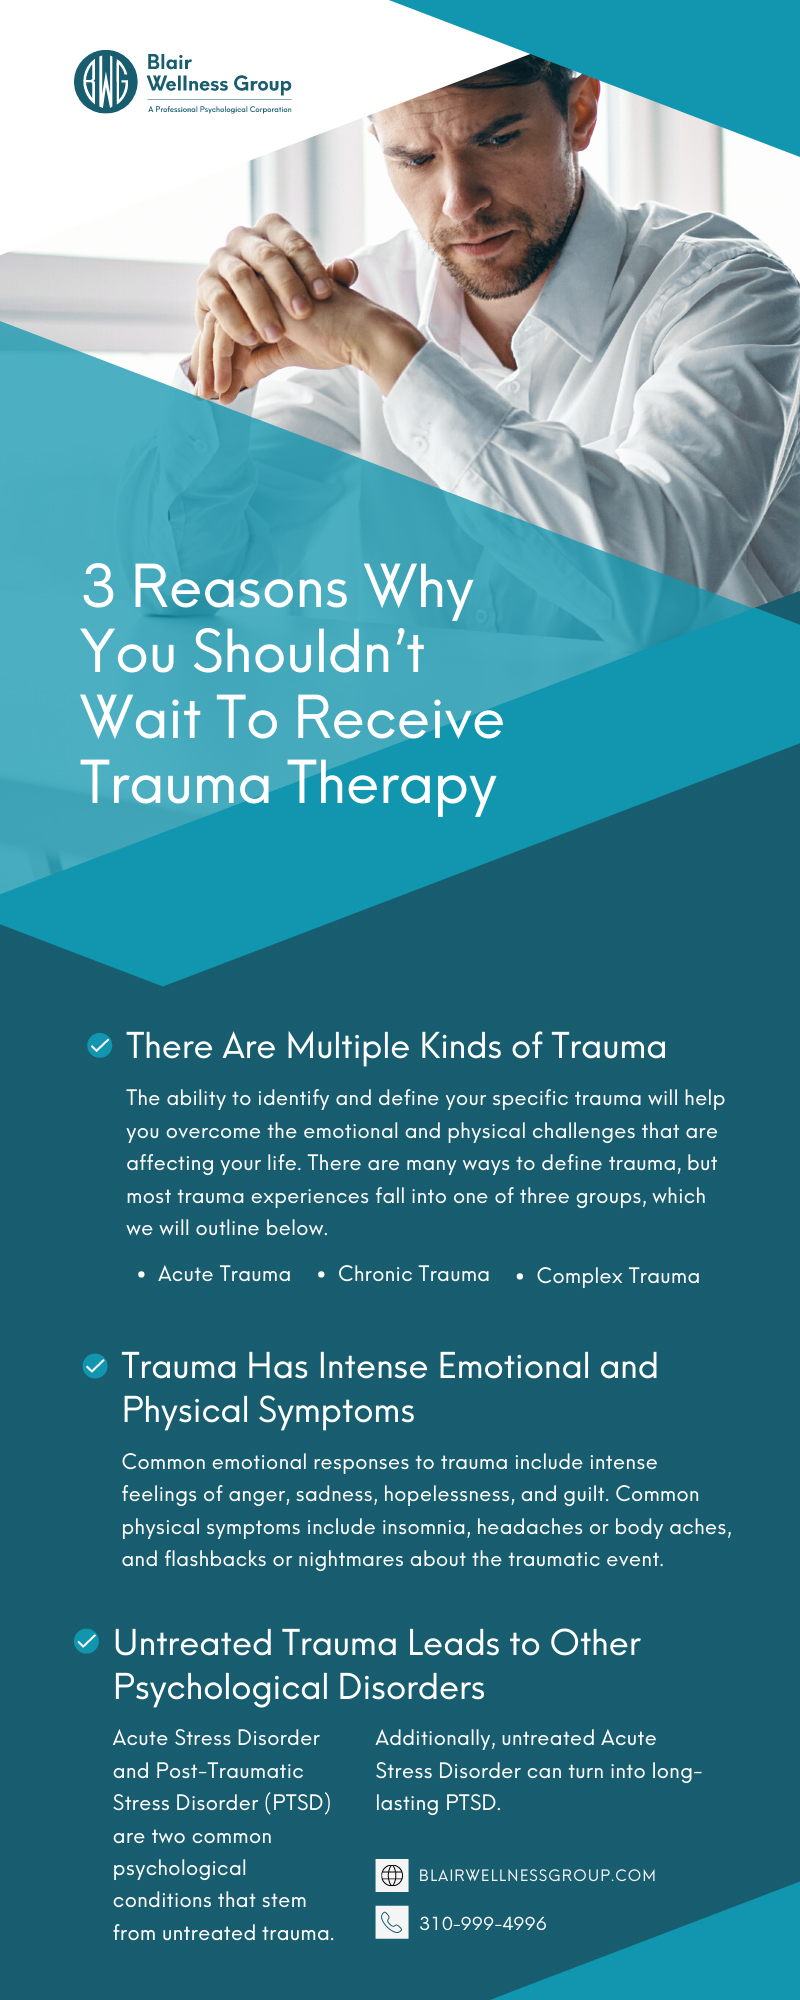 3 Reasons Why You Shouldn’t Wait To Receive Trauma Therapy